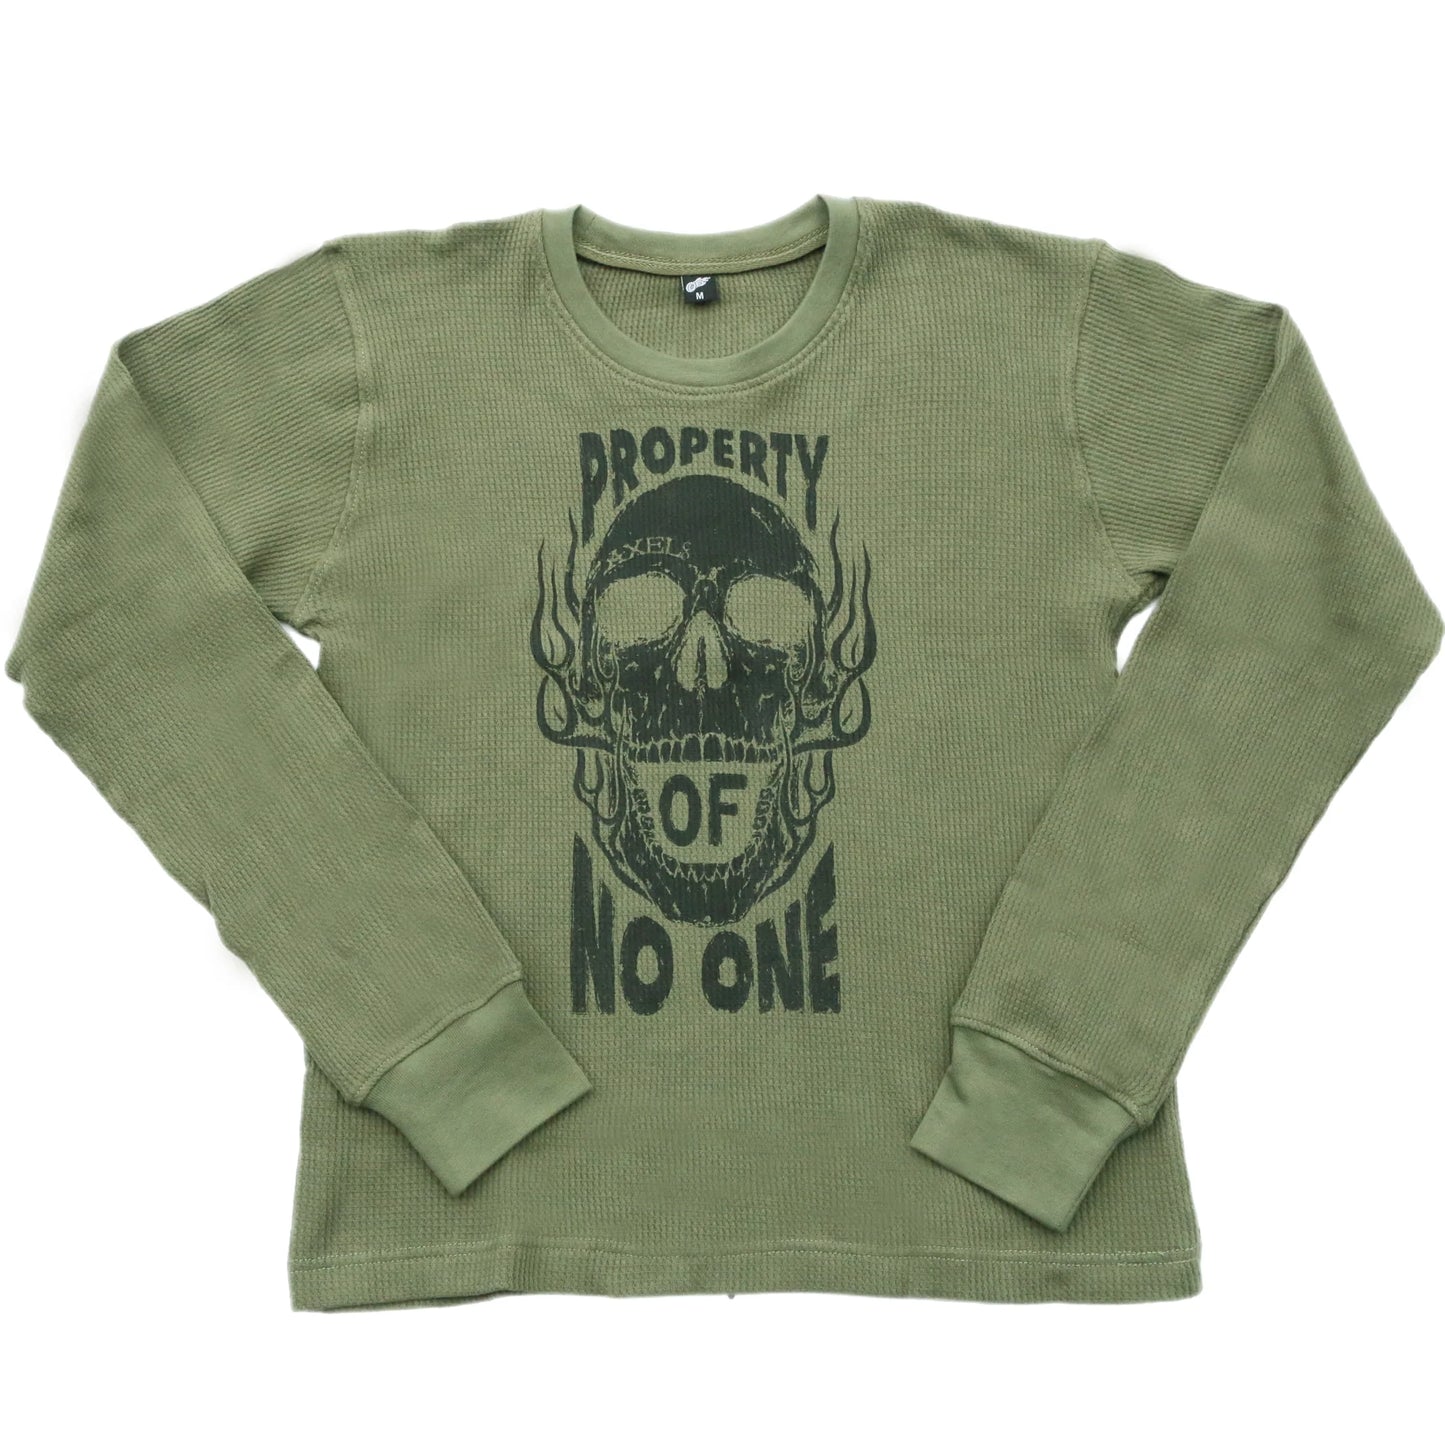 "PROPERTY OF NO ONE" THERMAL